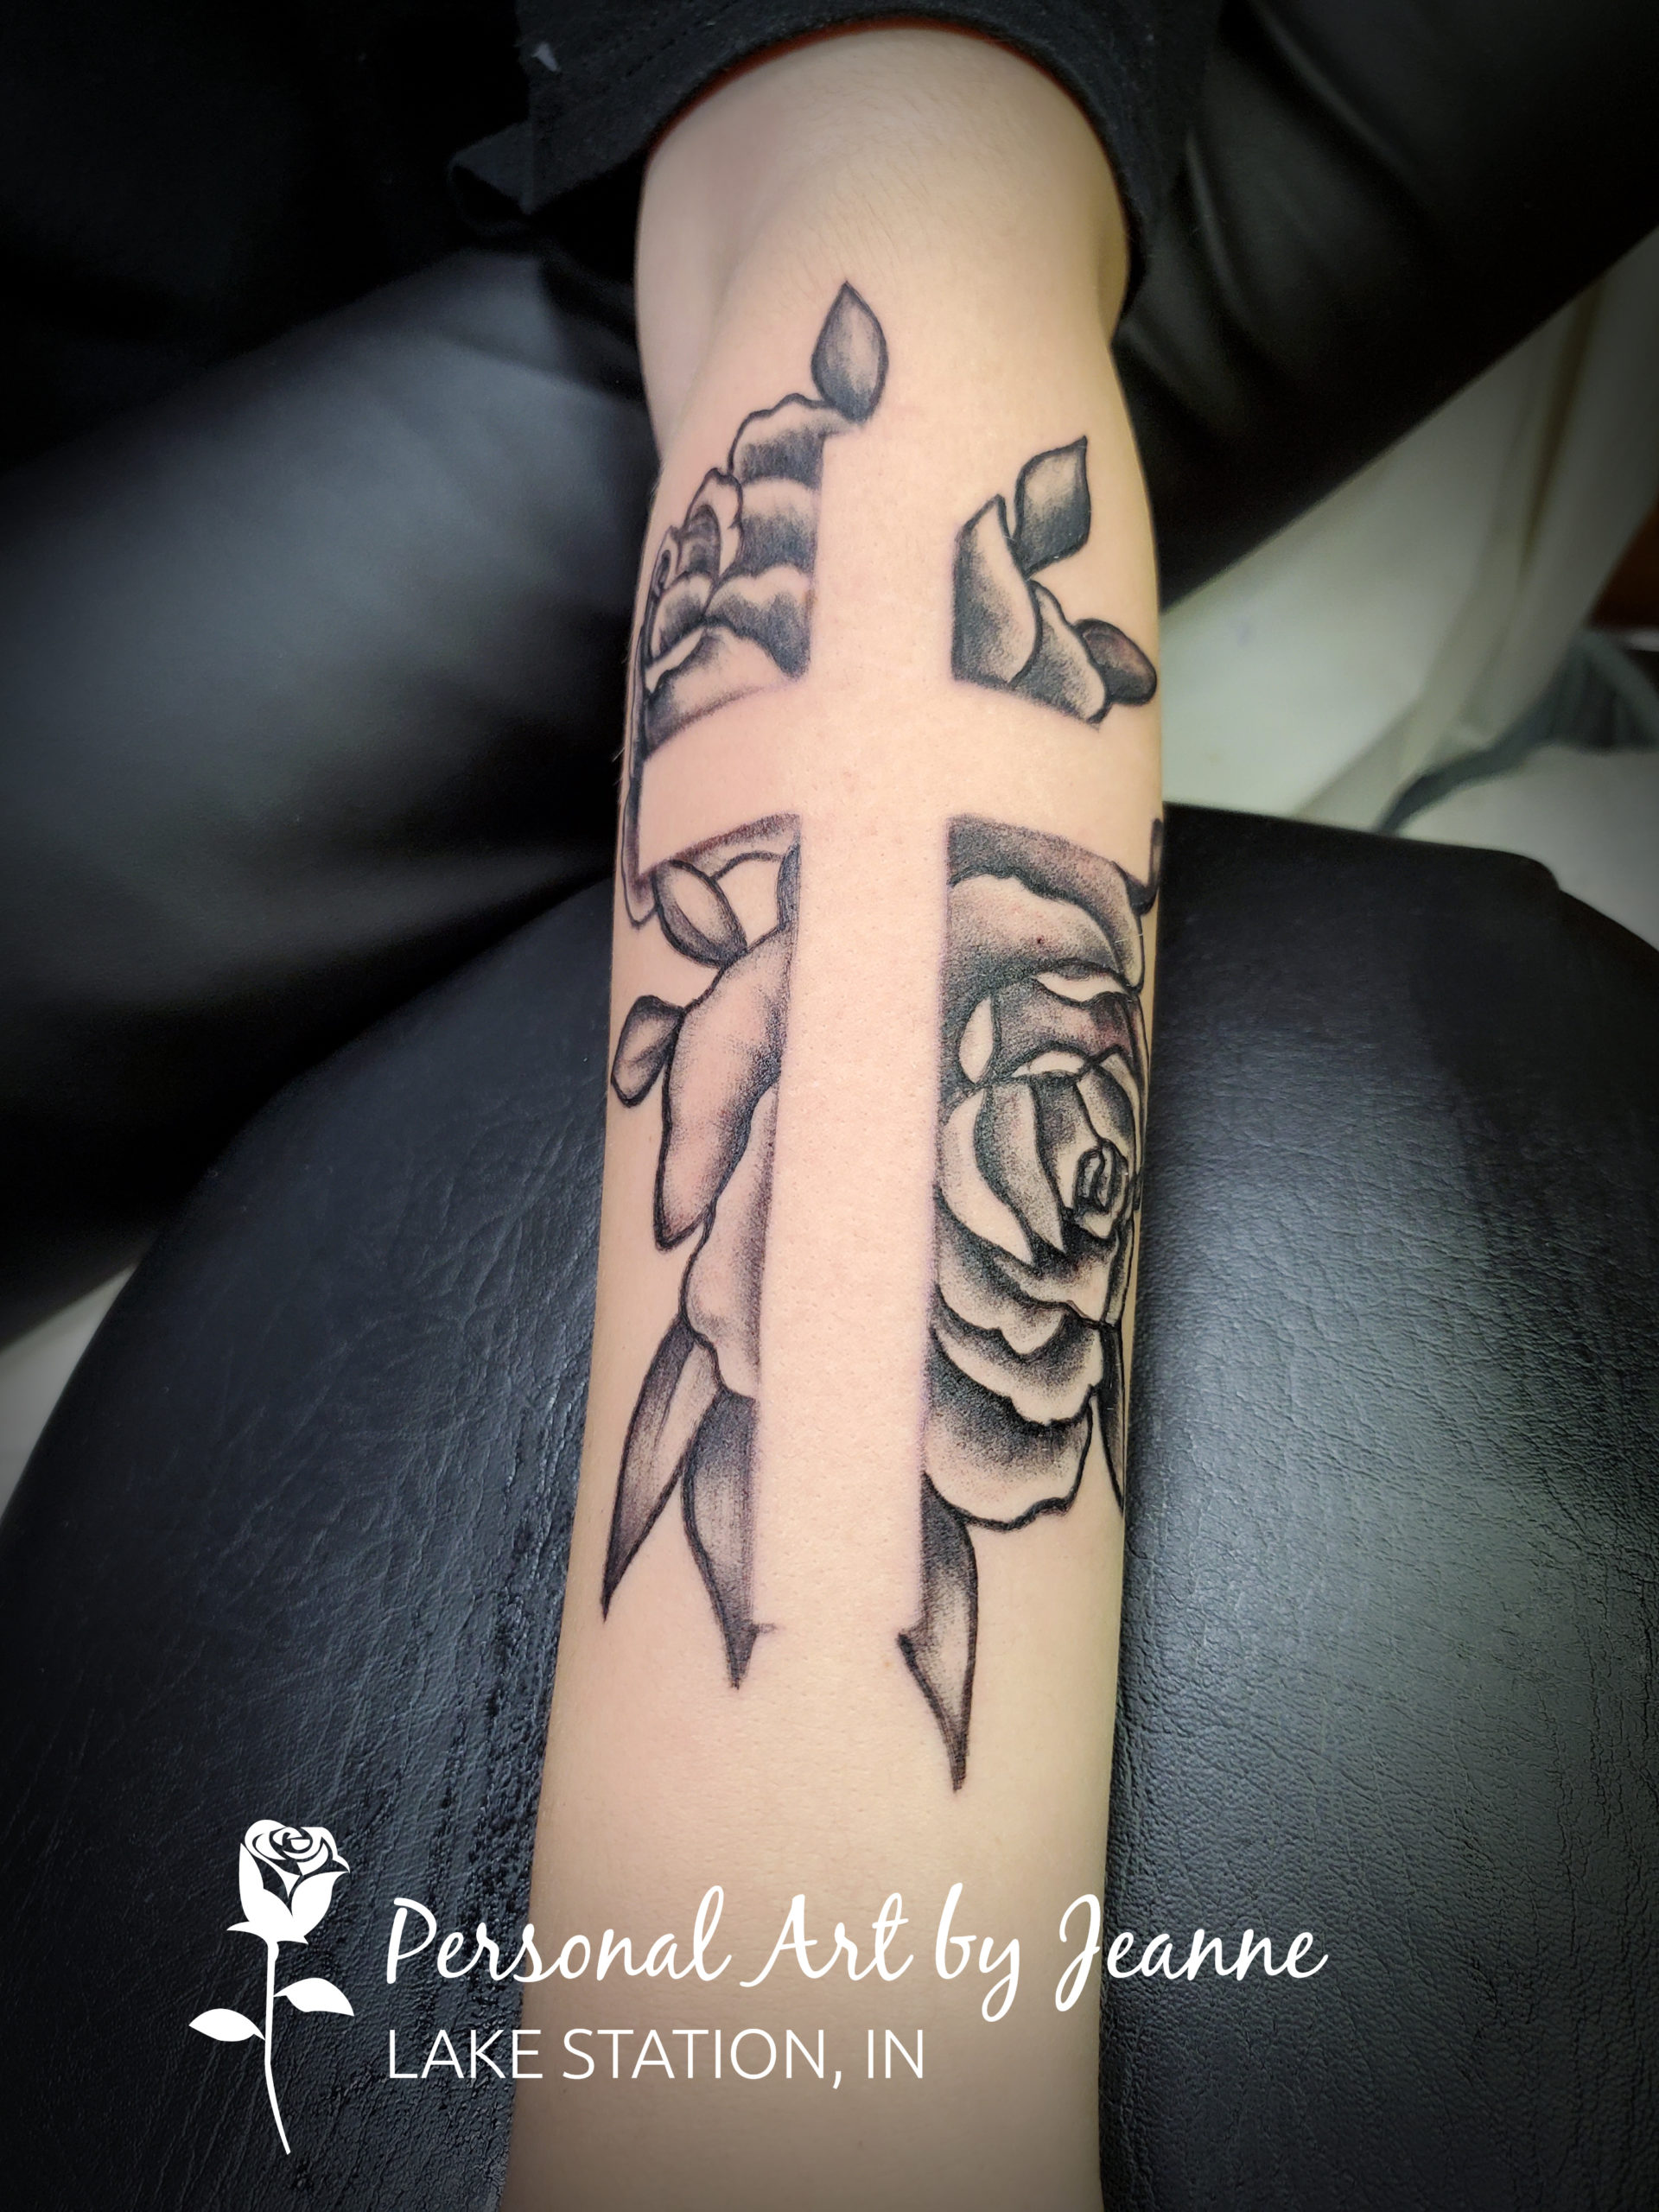 black and gray style rose tattoo with superimposed image of a cross